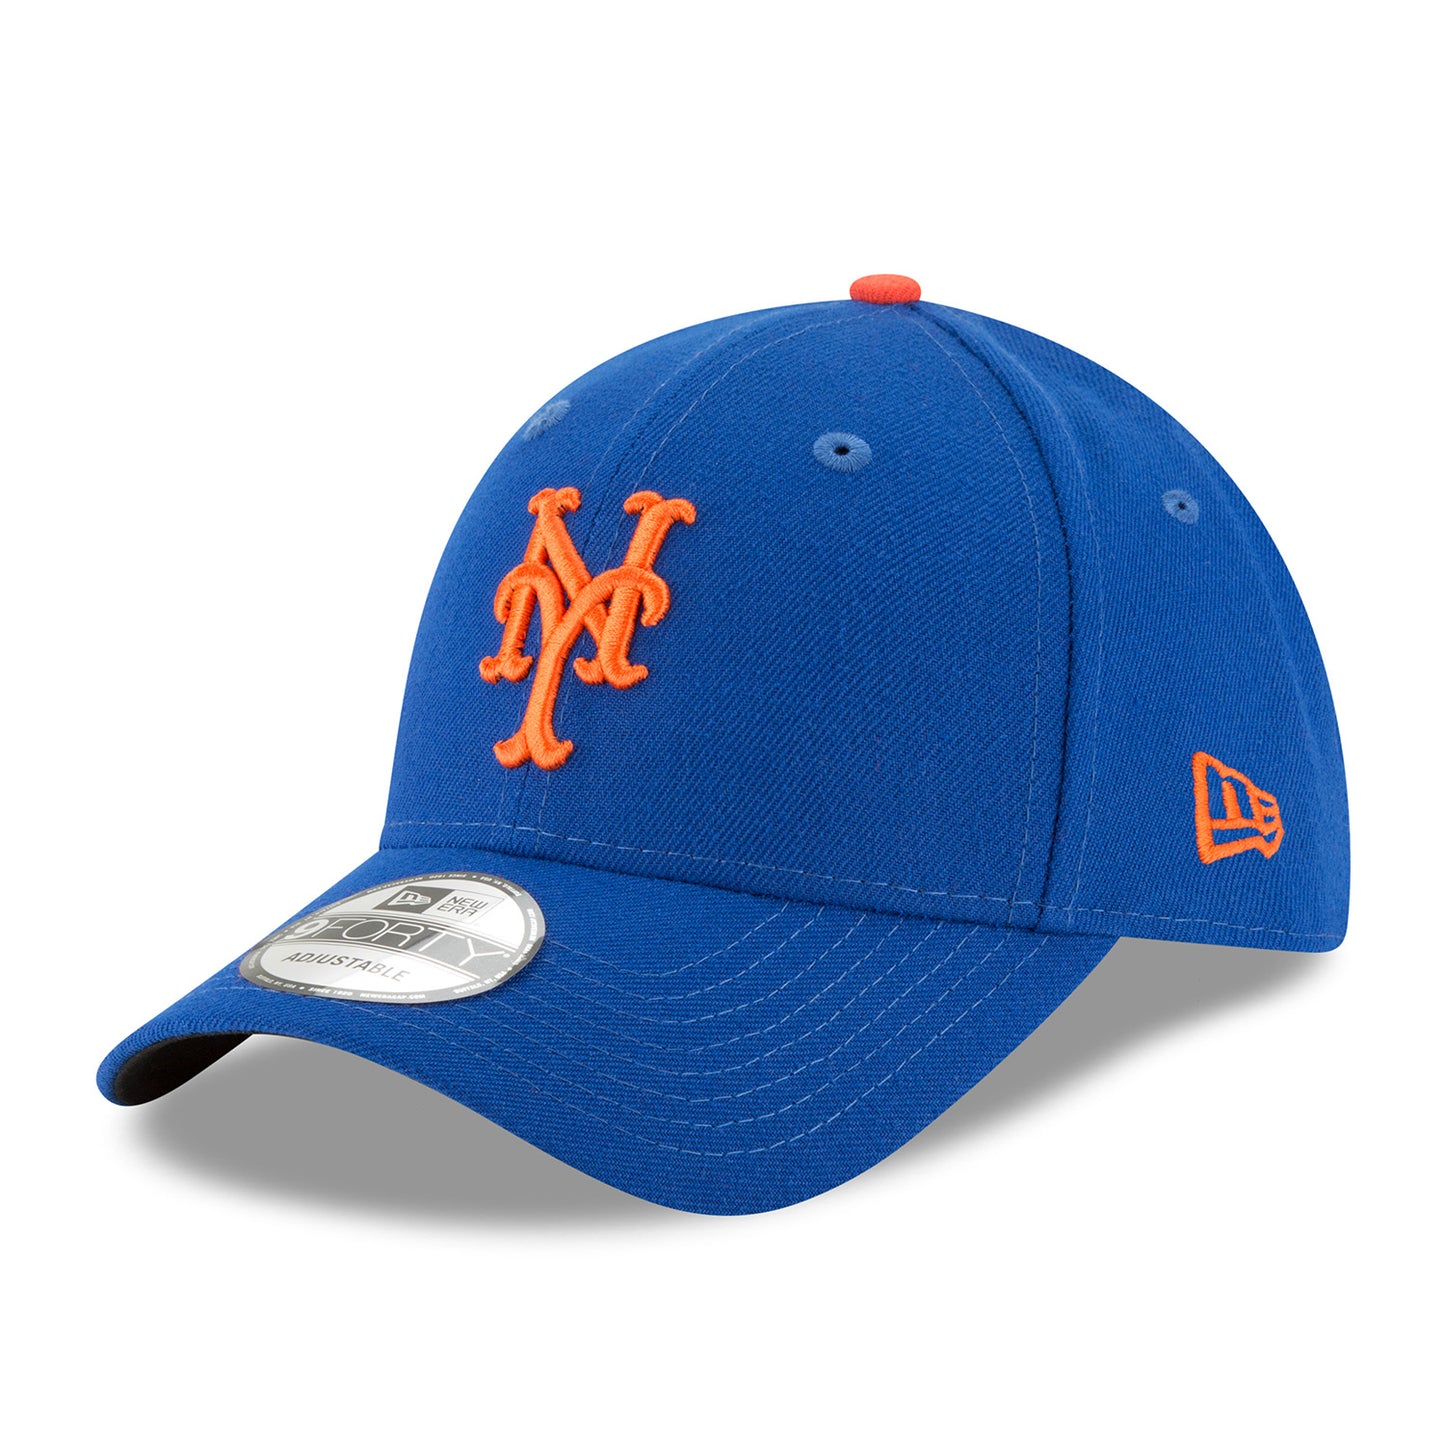 THE LEAGUE New York Mets 9FORTY New Era Cap